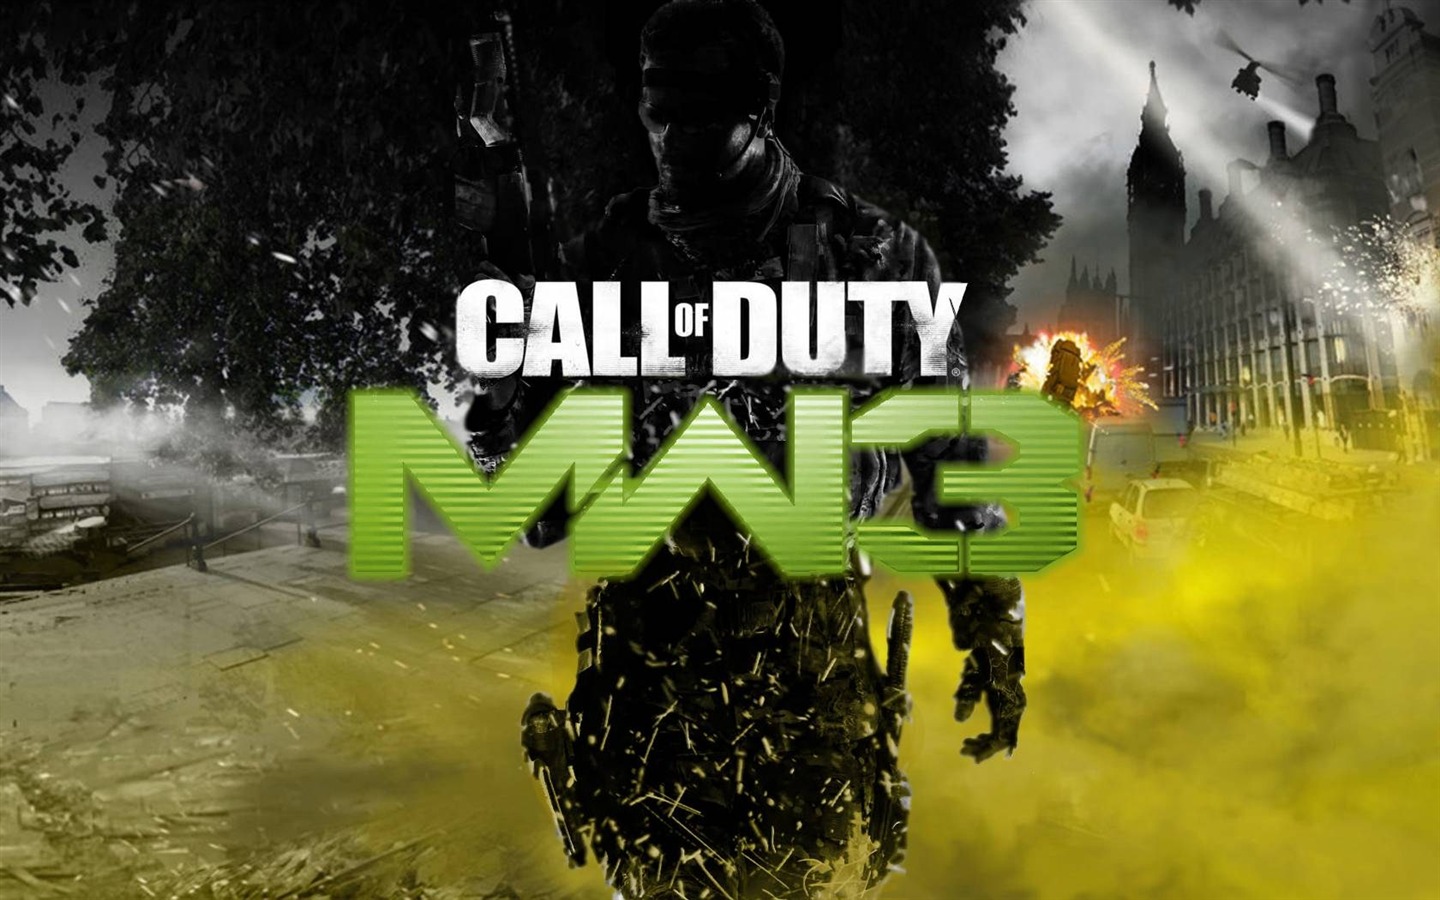 Call of Duty: MW3 HD Wallpapers #4 - 1440x900